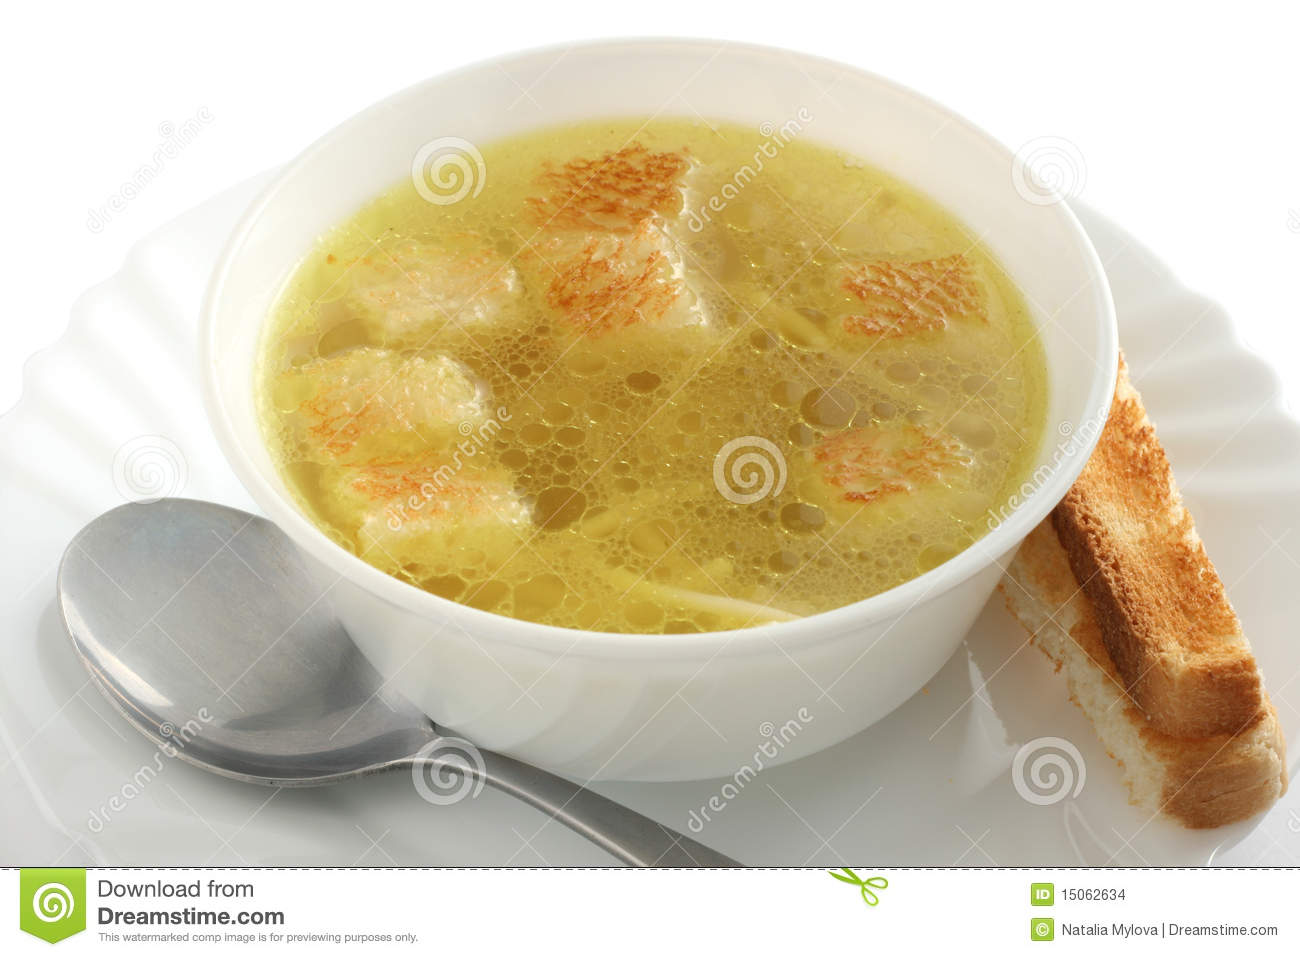 Chicken Broth With Dried Crust Stock Images   Image  15062634